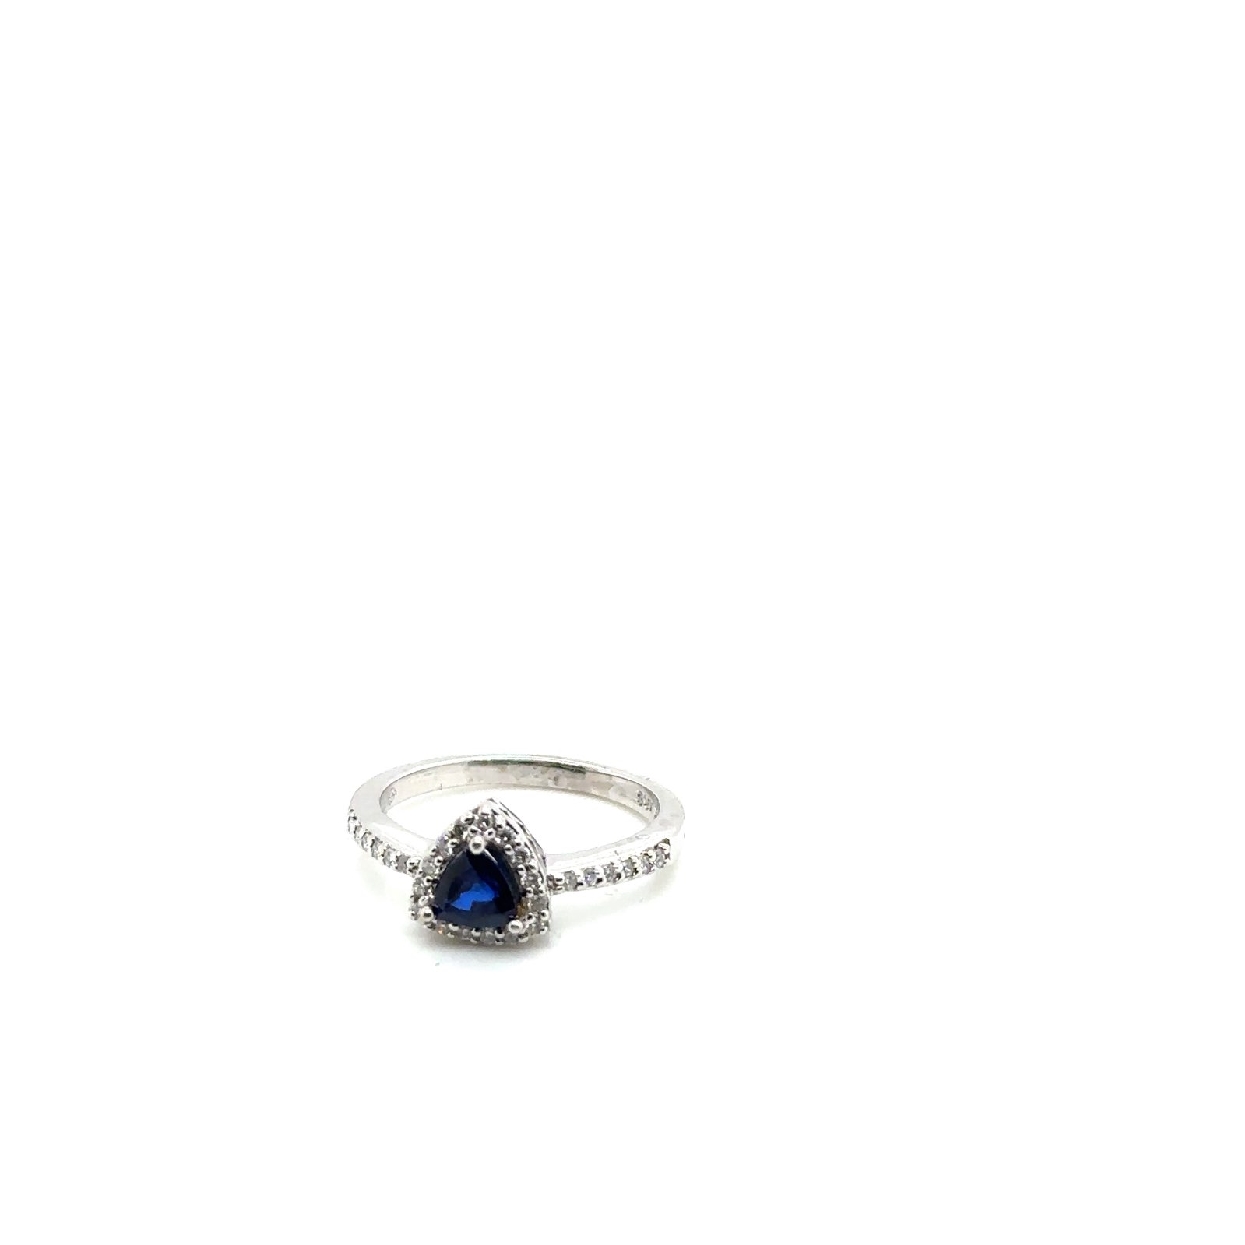 14K White Gold Trilliant Cut Sapphire Ring with Diamond Halo Size 8
.40TDW 